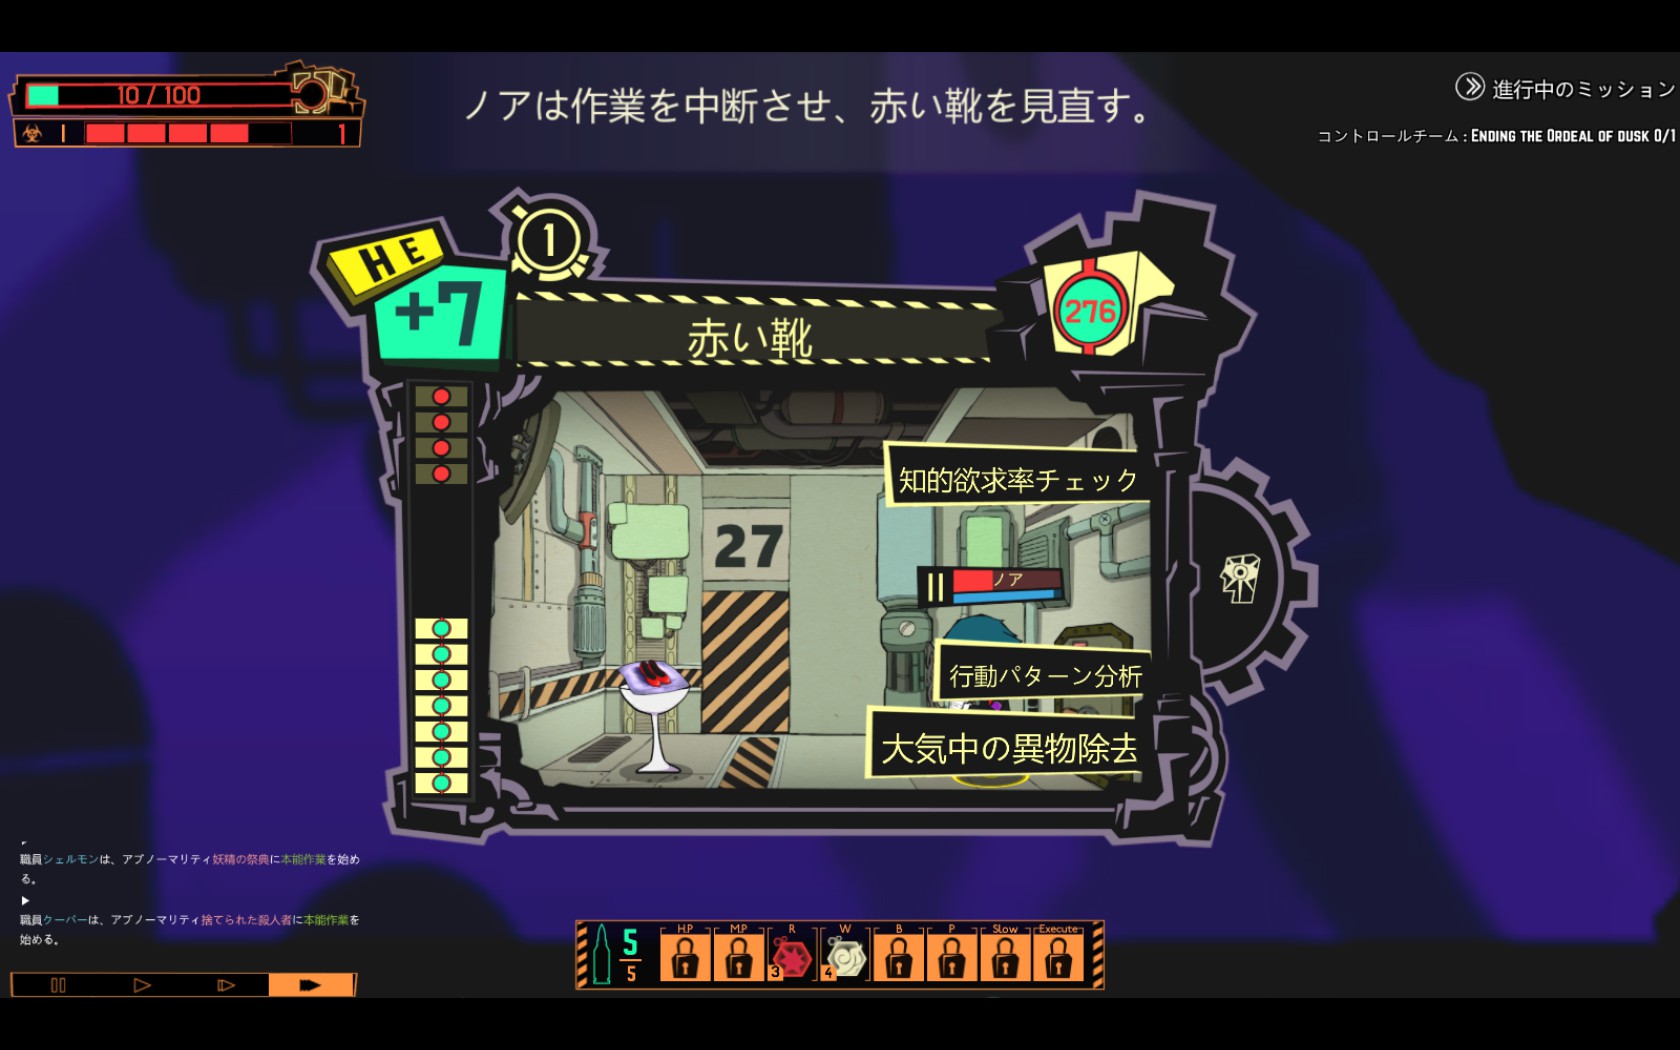 download lobotomy corporation g2a for free